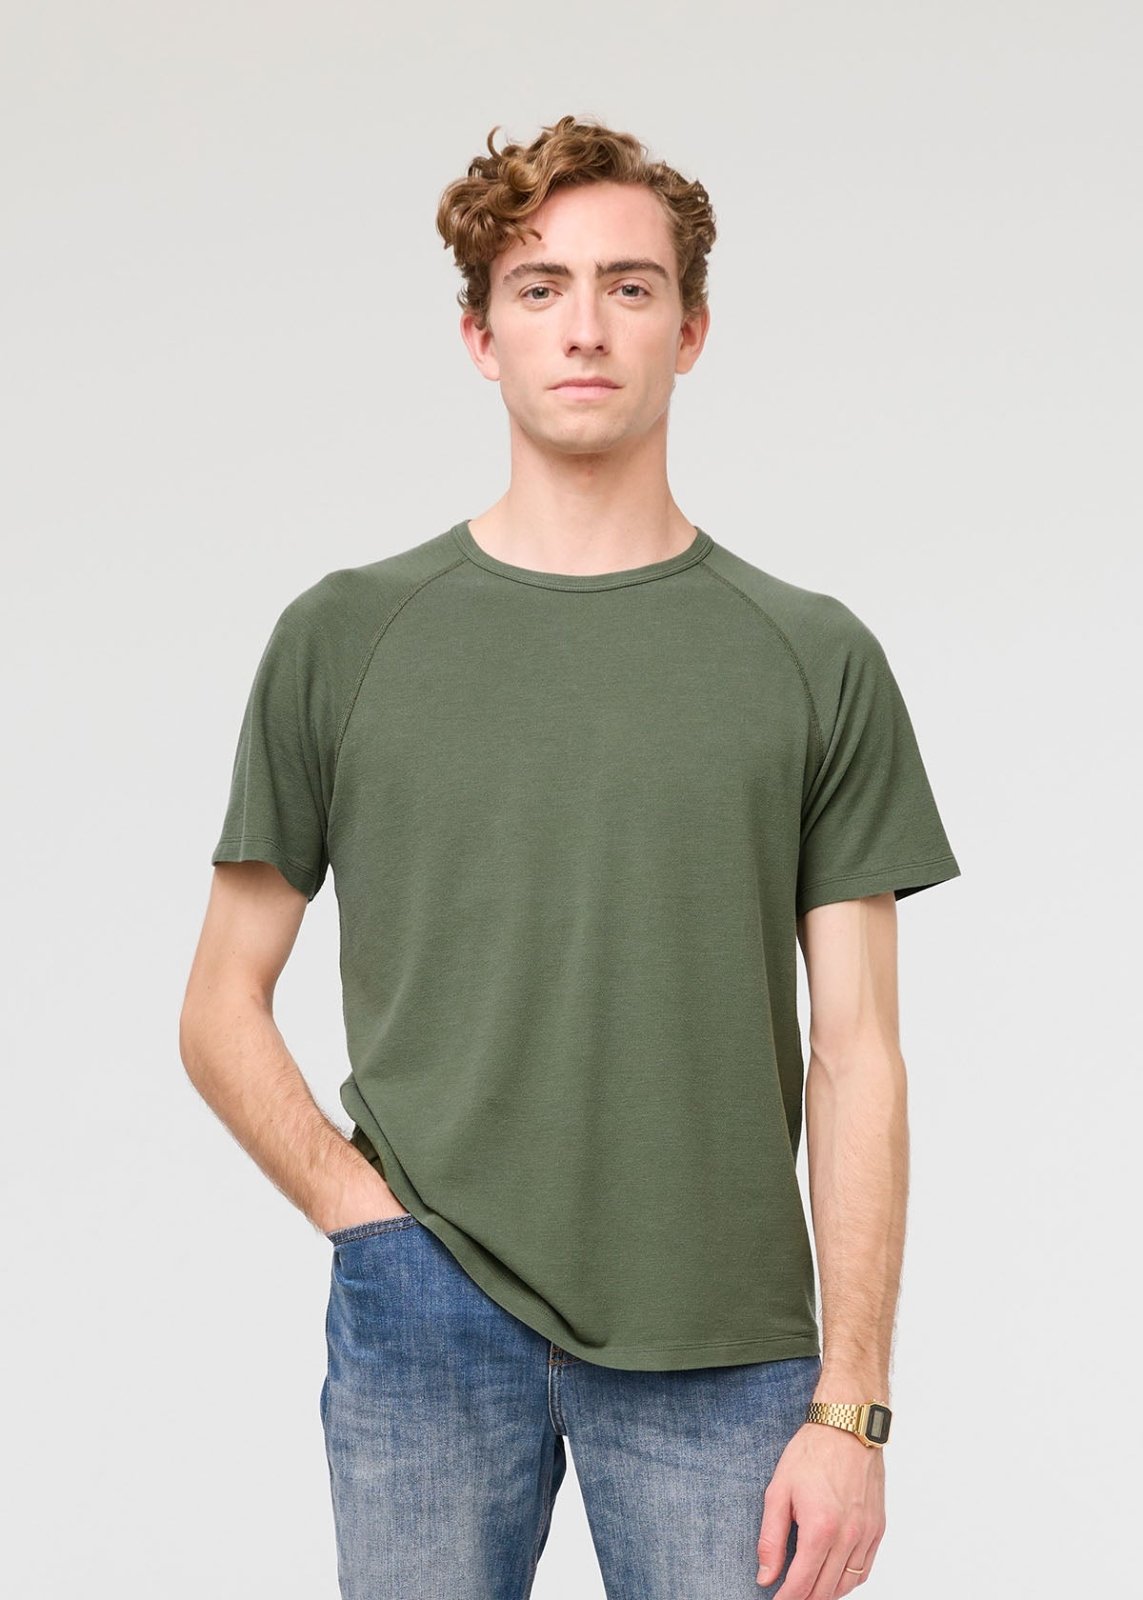 mens breathable green tee front